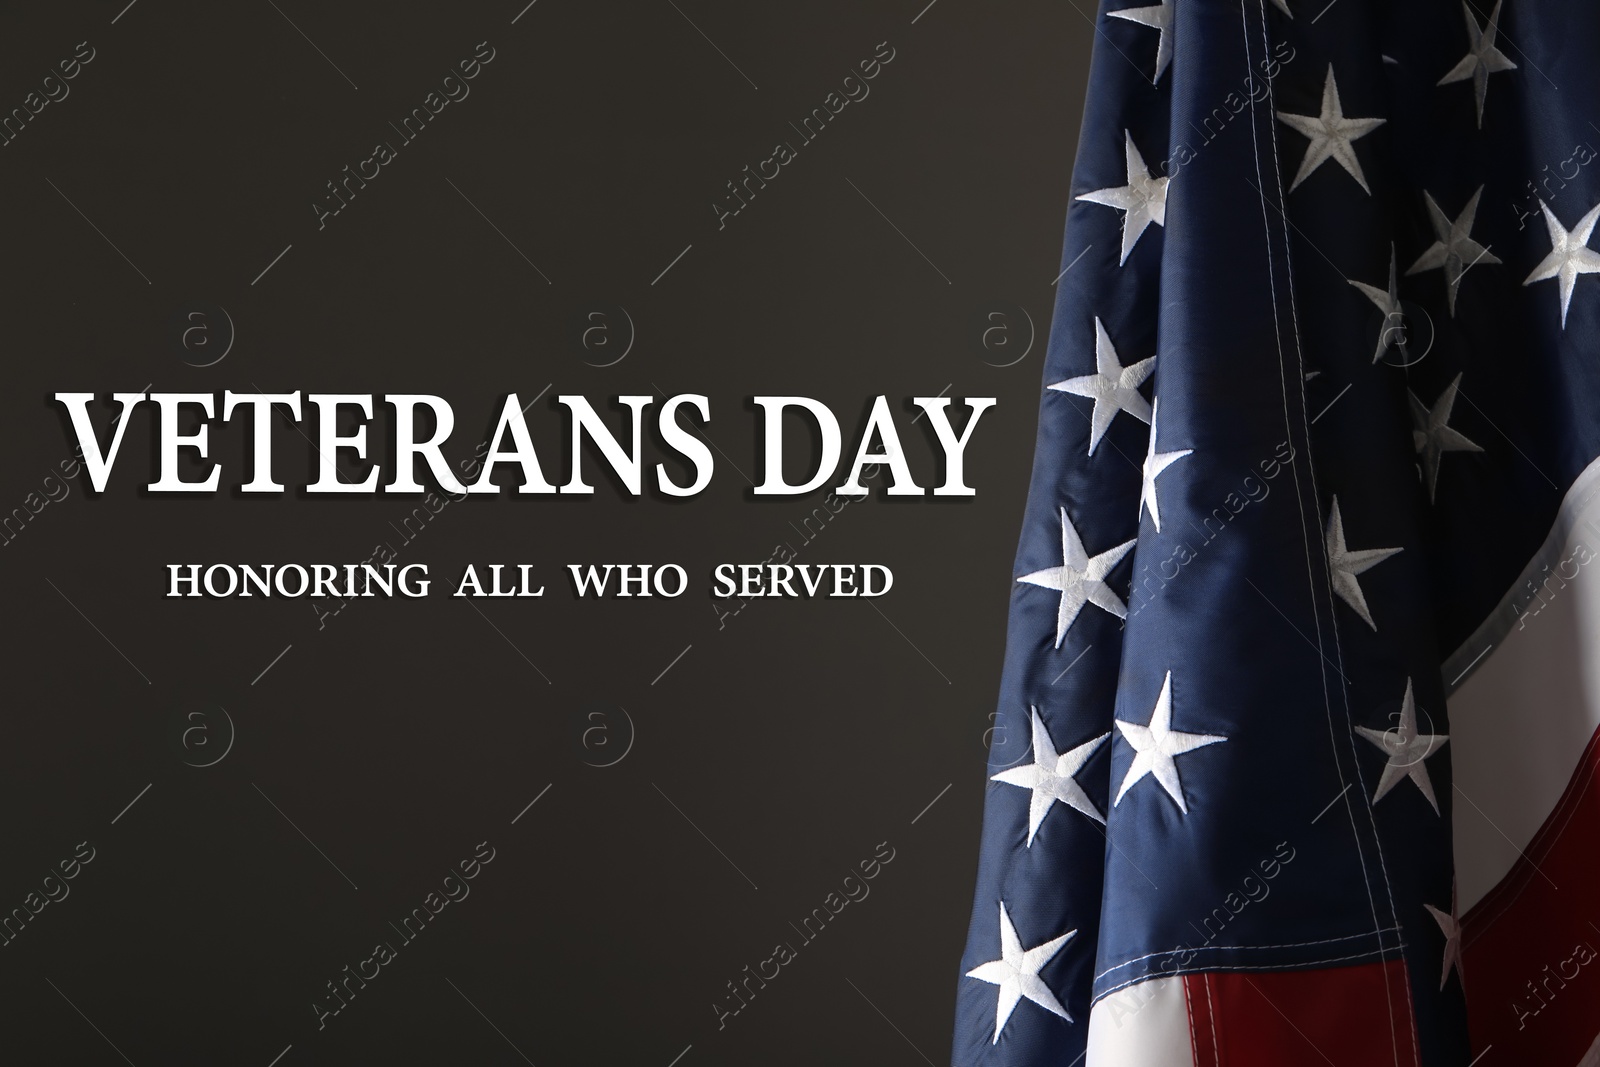 Image of Veterans day. Honoring all who served. American flag on dark background